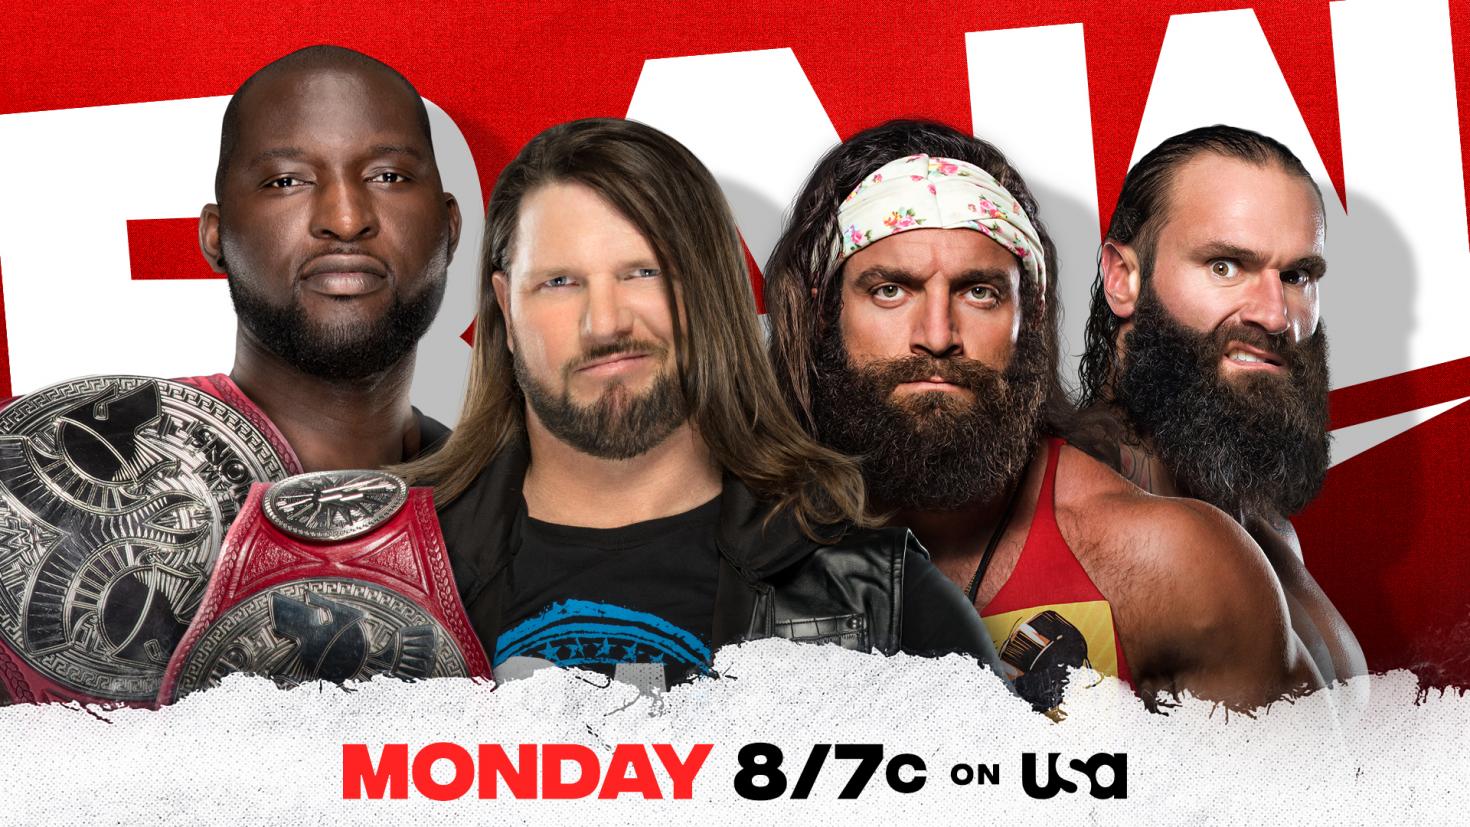 WWE Raw Preview for May 31